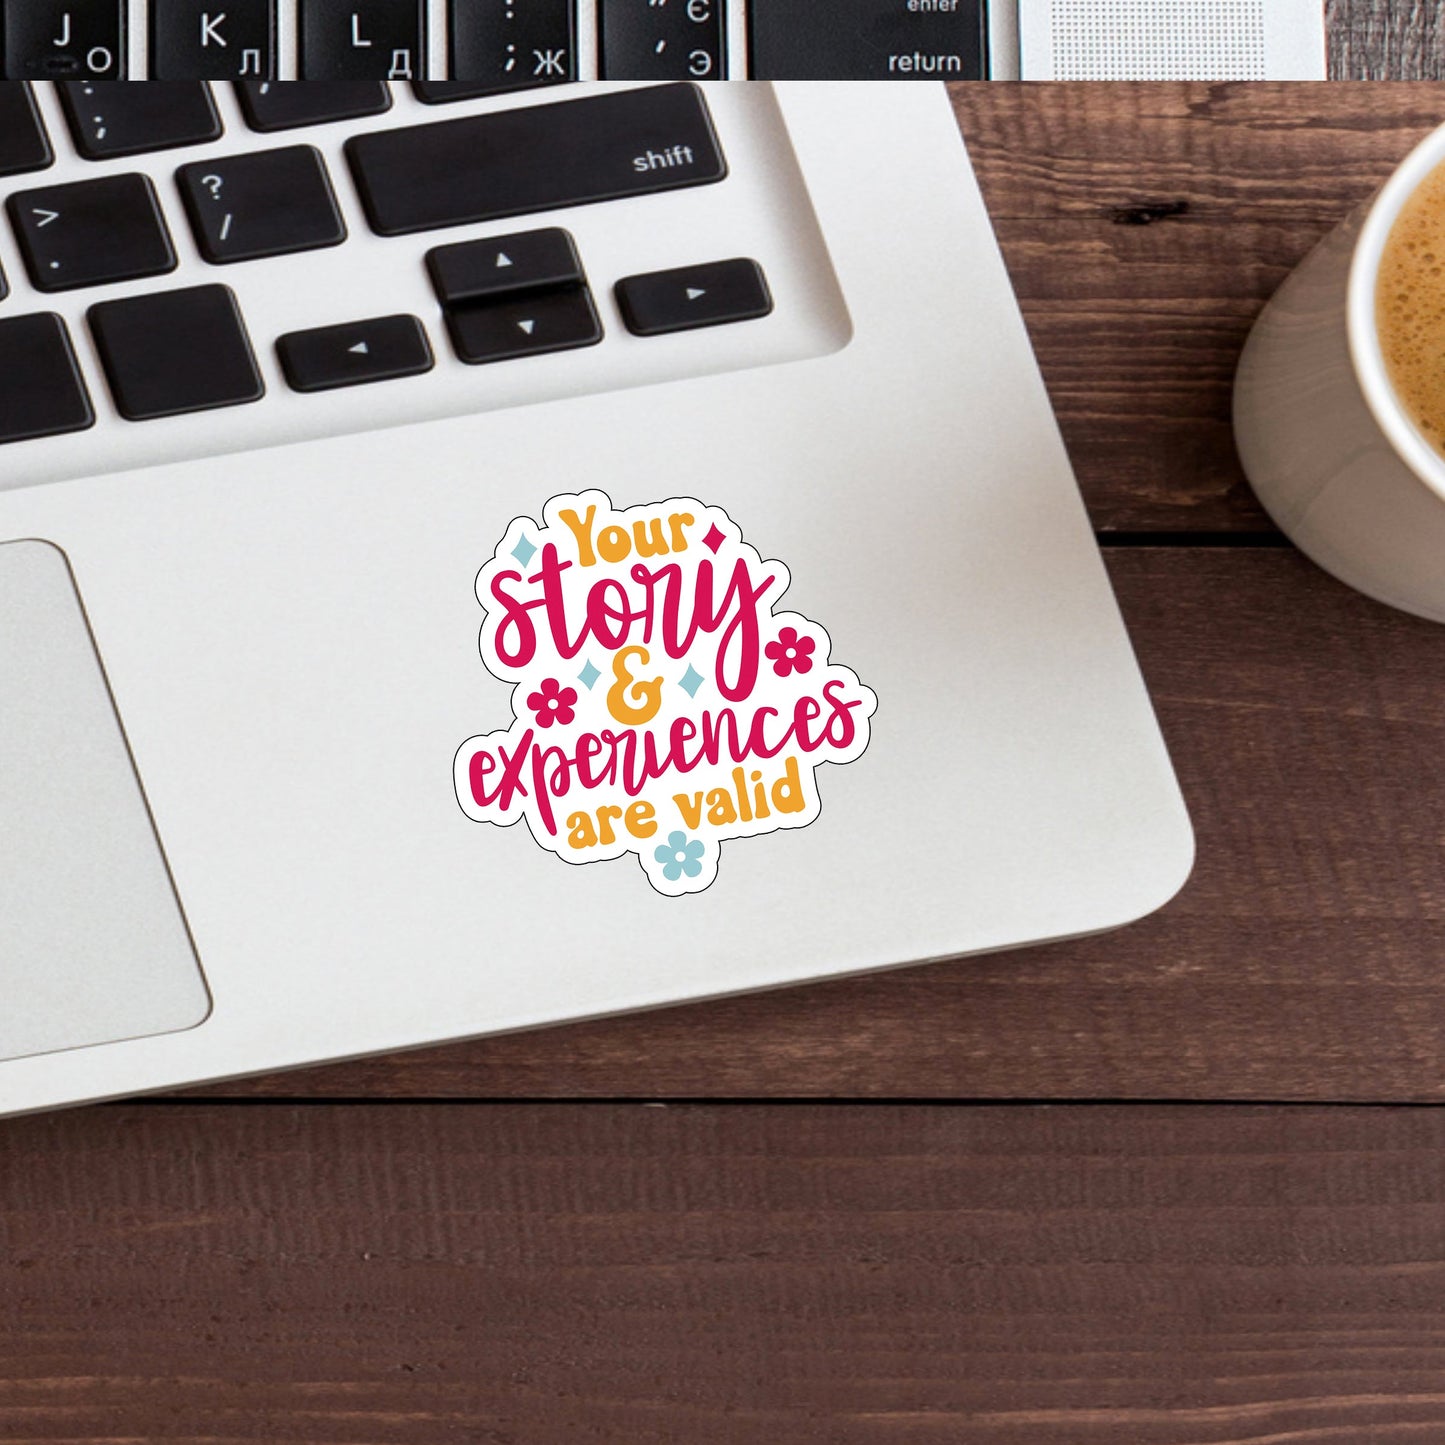 Your story and experiences are valid  Sticker,  Vinyl sticker, laptop sticker, Tablet sticker